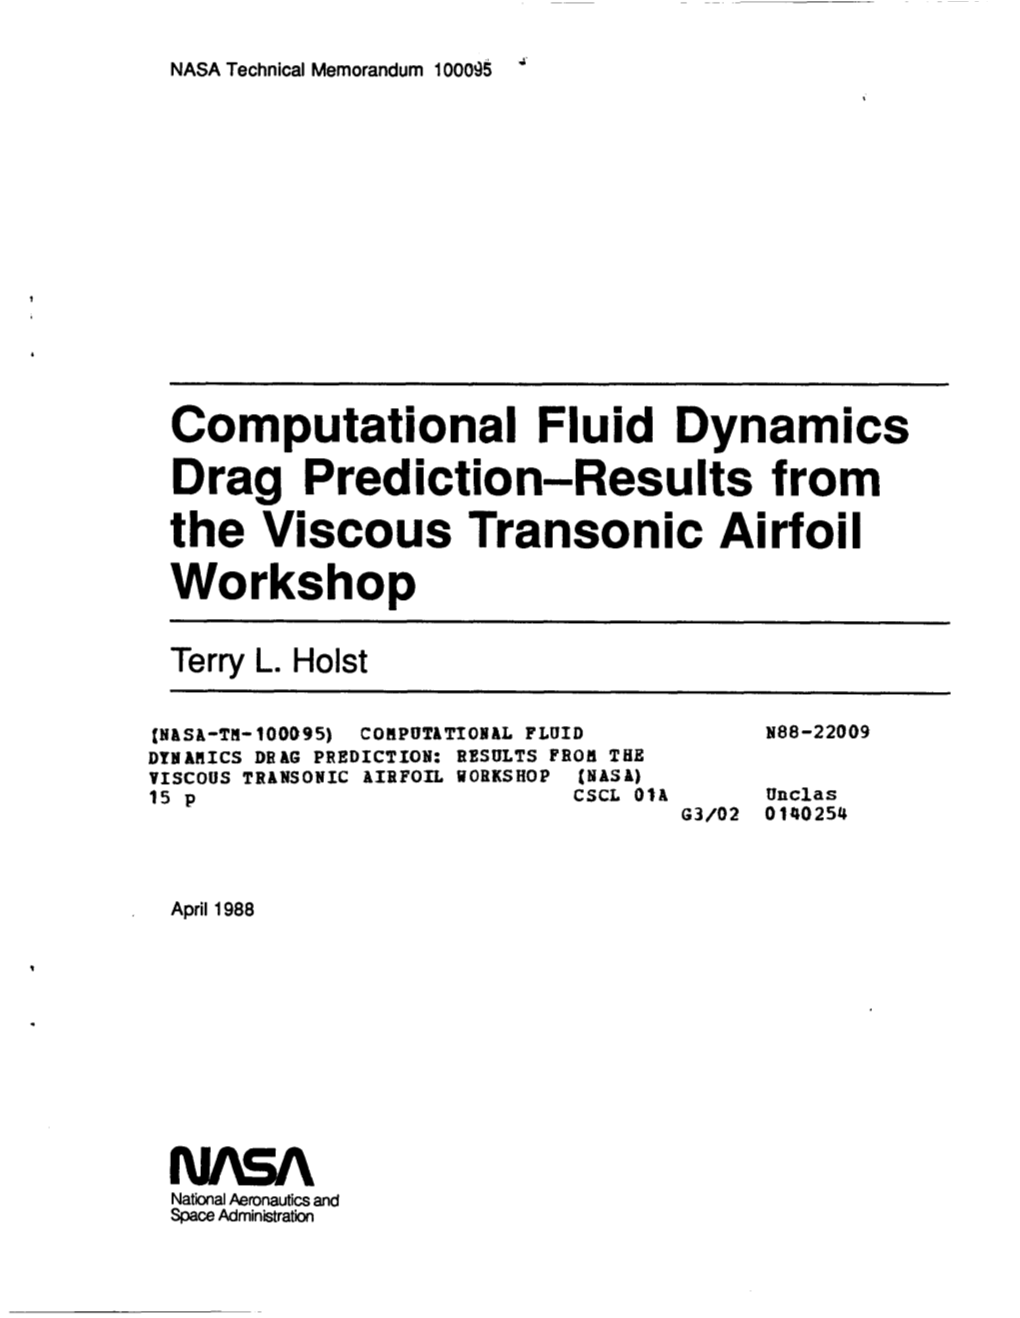 Computational Fluid Dynamics Drag Prediction-Results from the Viscous Transonic Airfoil Workshop